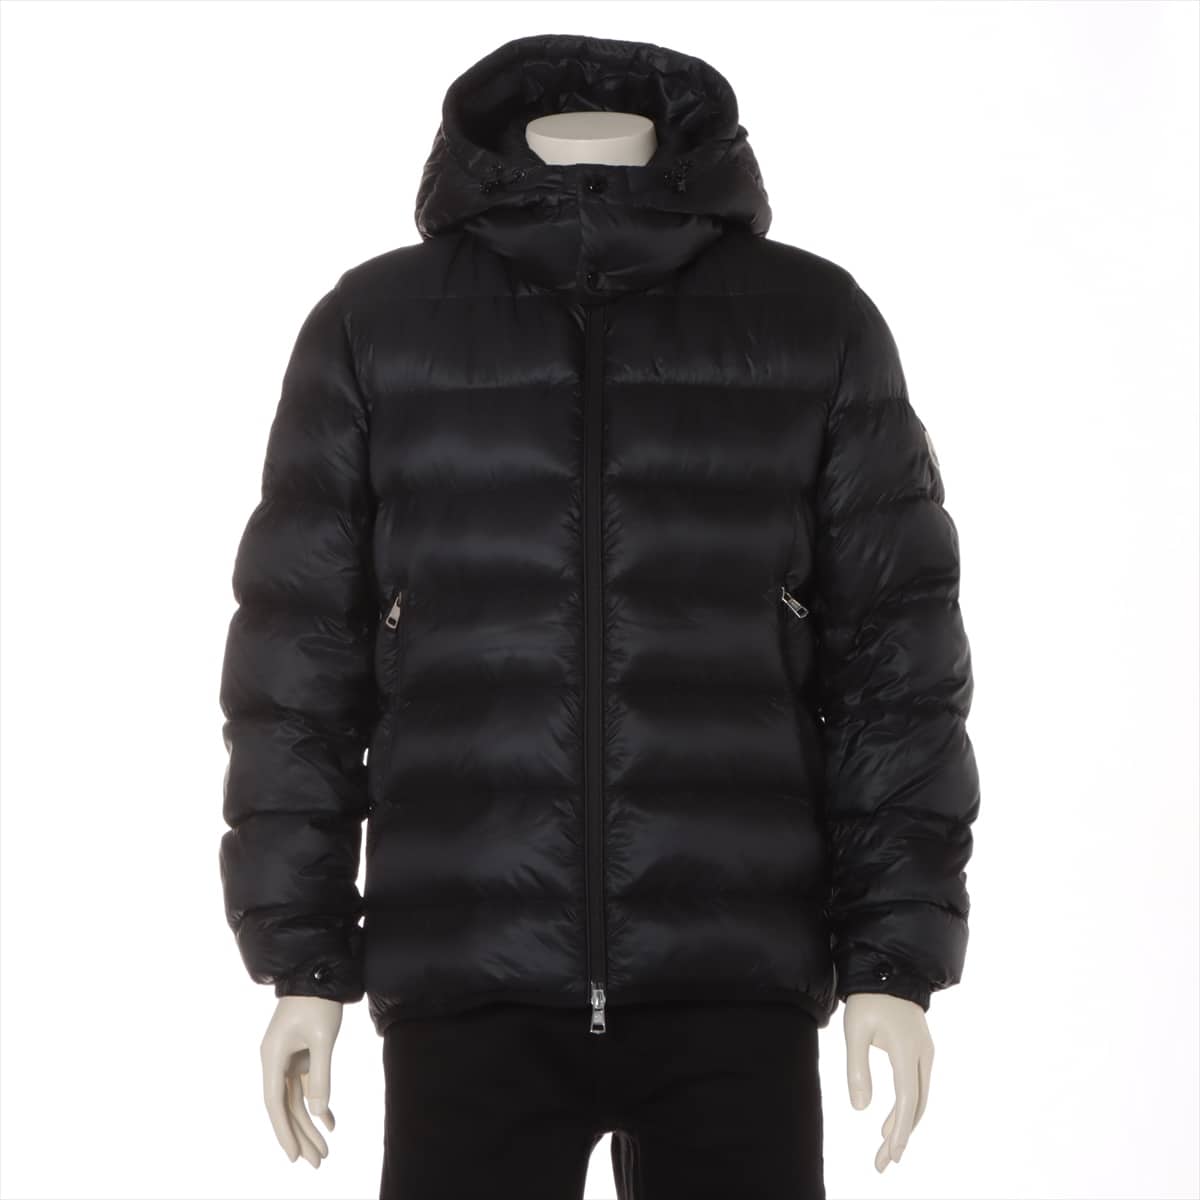 Moncler VERTE 20 years Nylon Down jacket 3 Men's Black  Removable hood  Is there a tsure